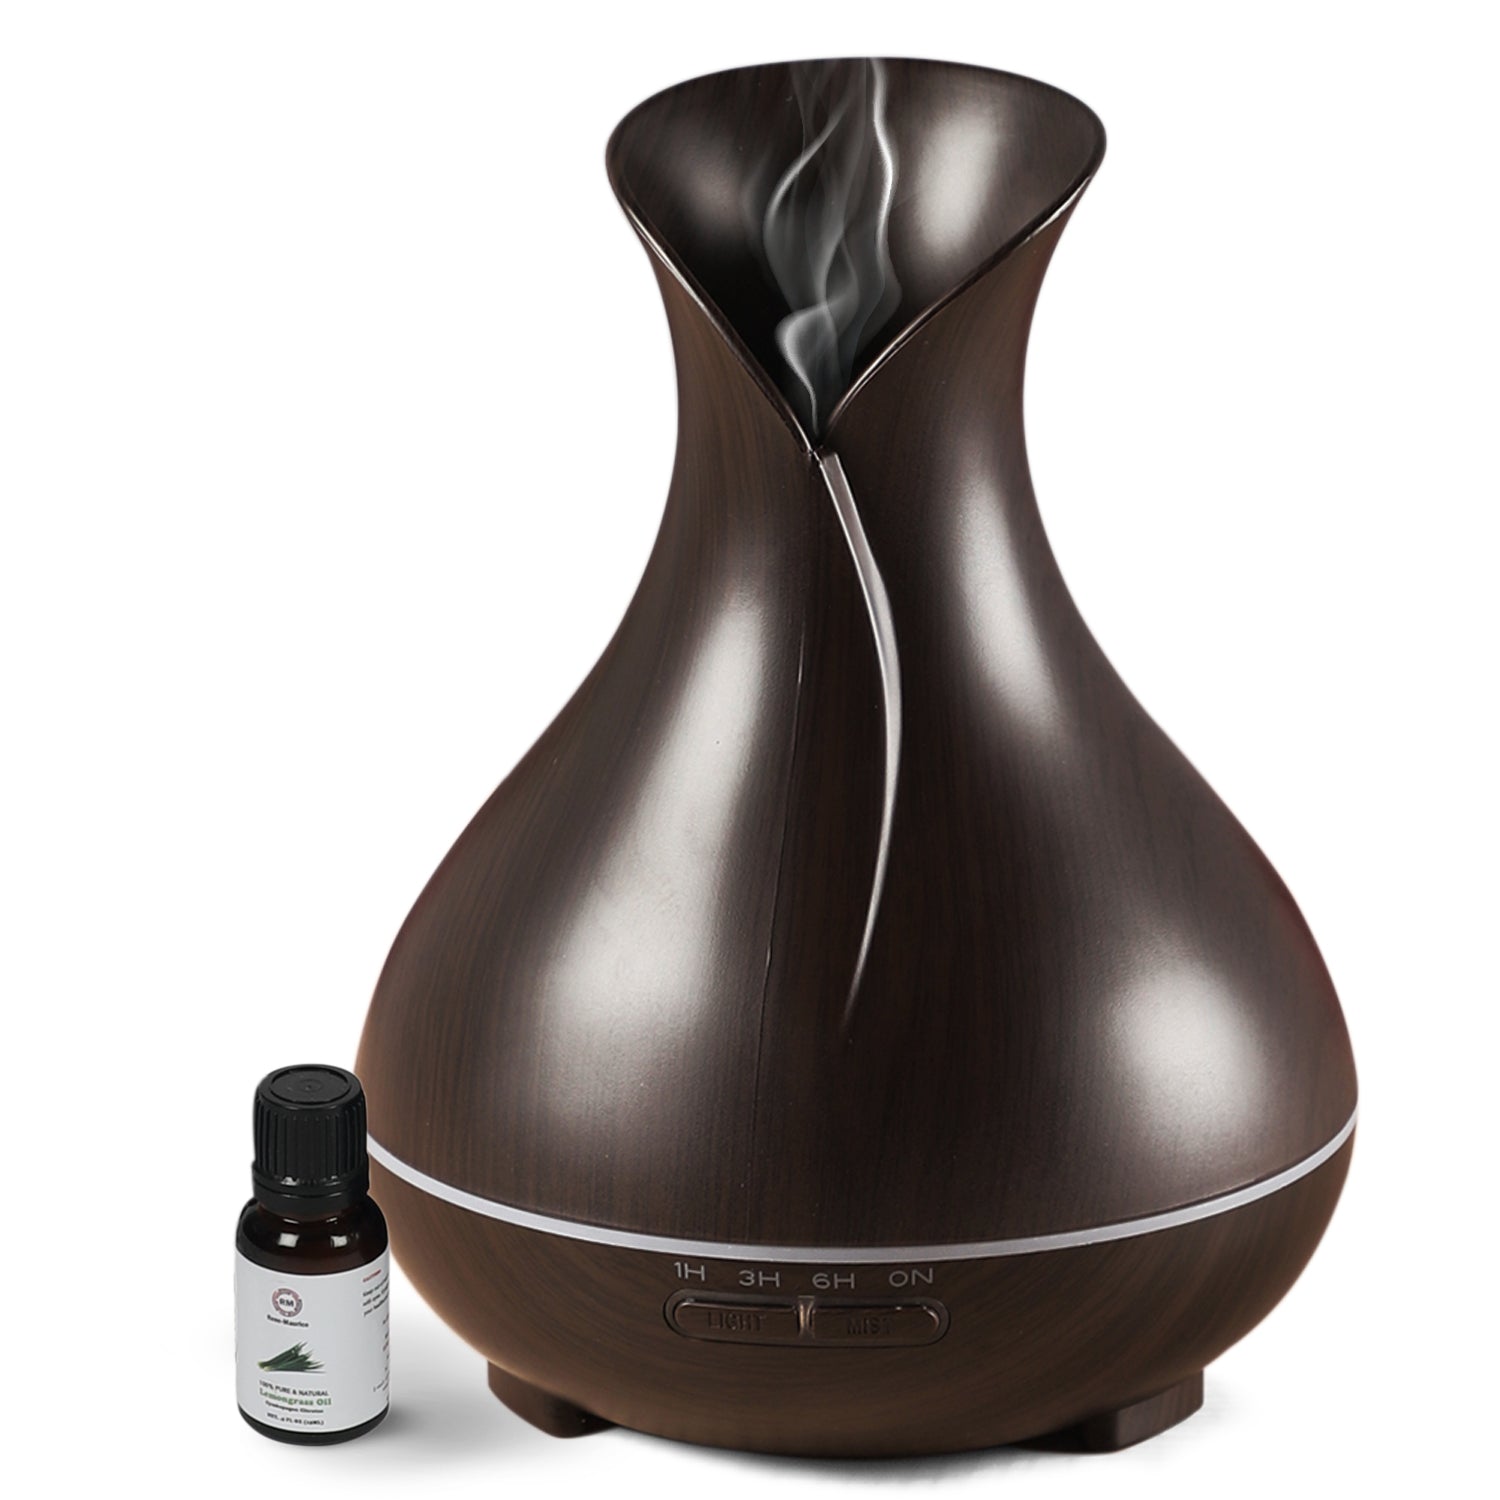 ReNe-Maurice Electric Ultrasonic Aroma Diffuser- Free Essential Oil